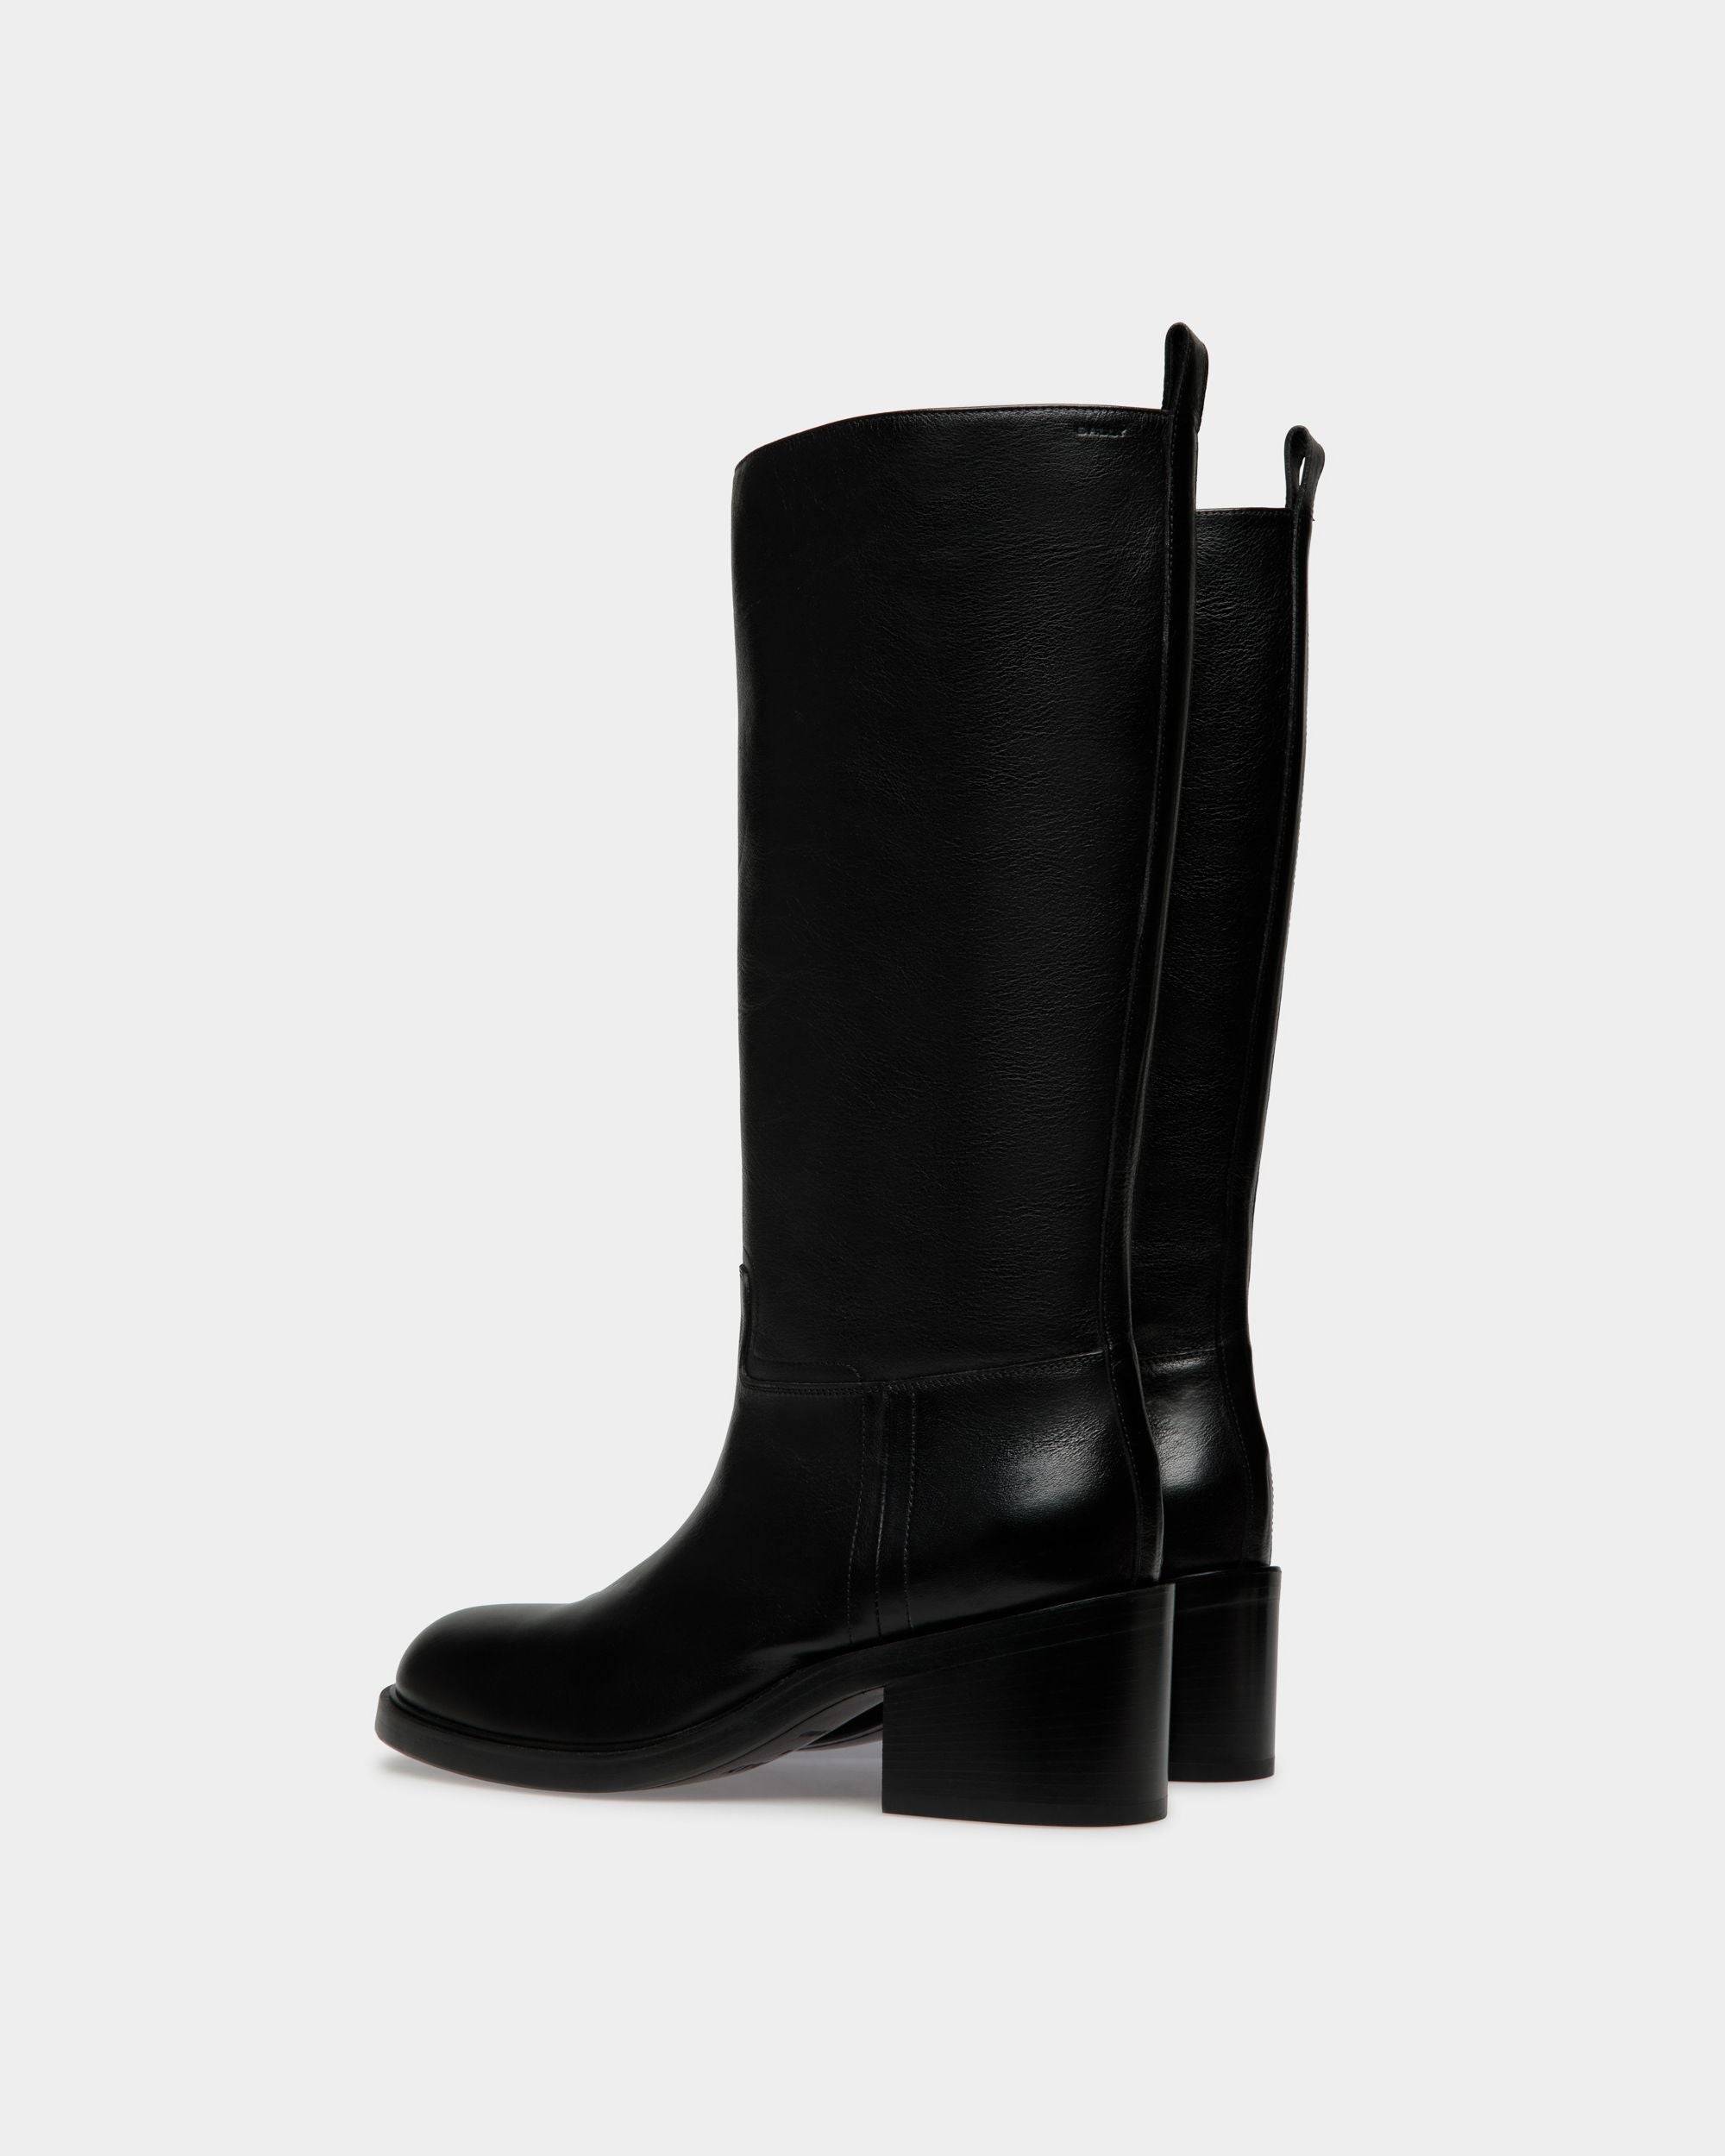 Peggy | Women's Boot in Black Leather | Bally | Still Life 3/4 Back